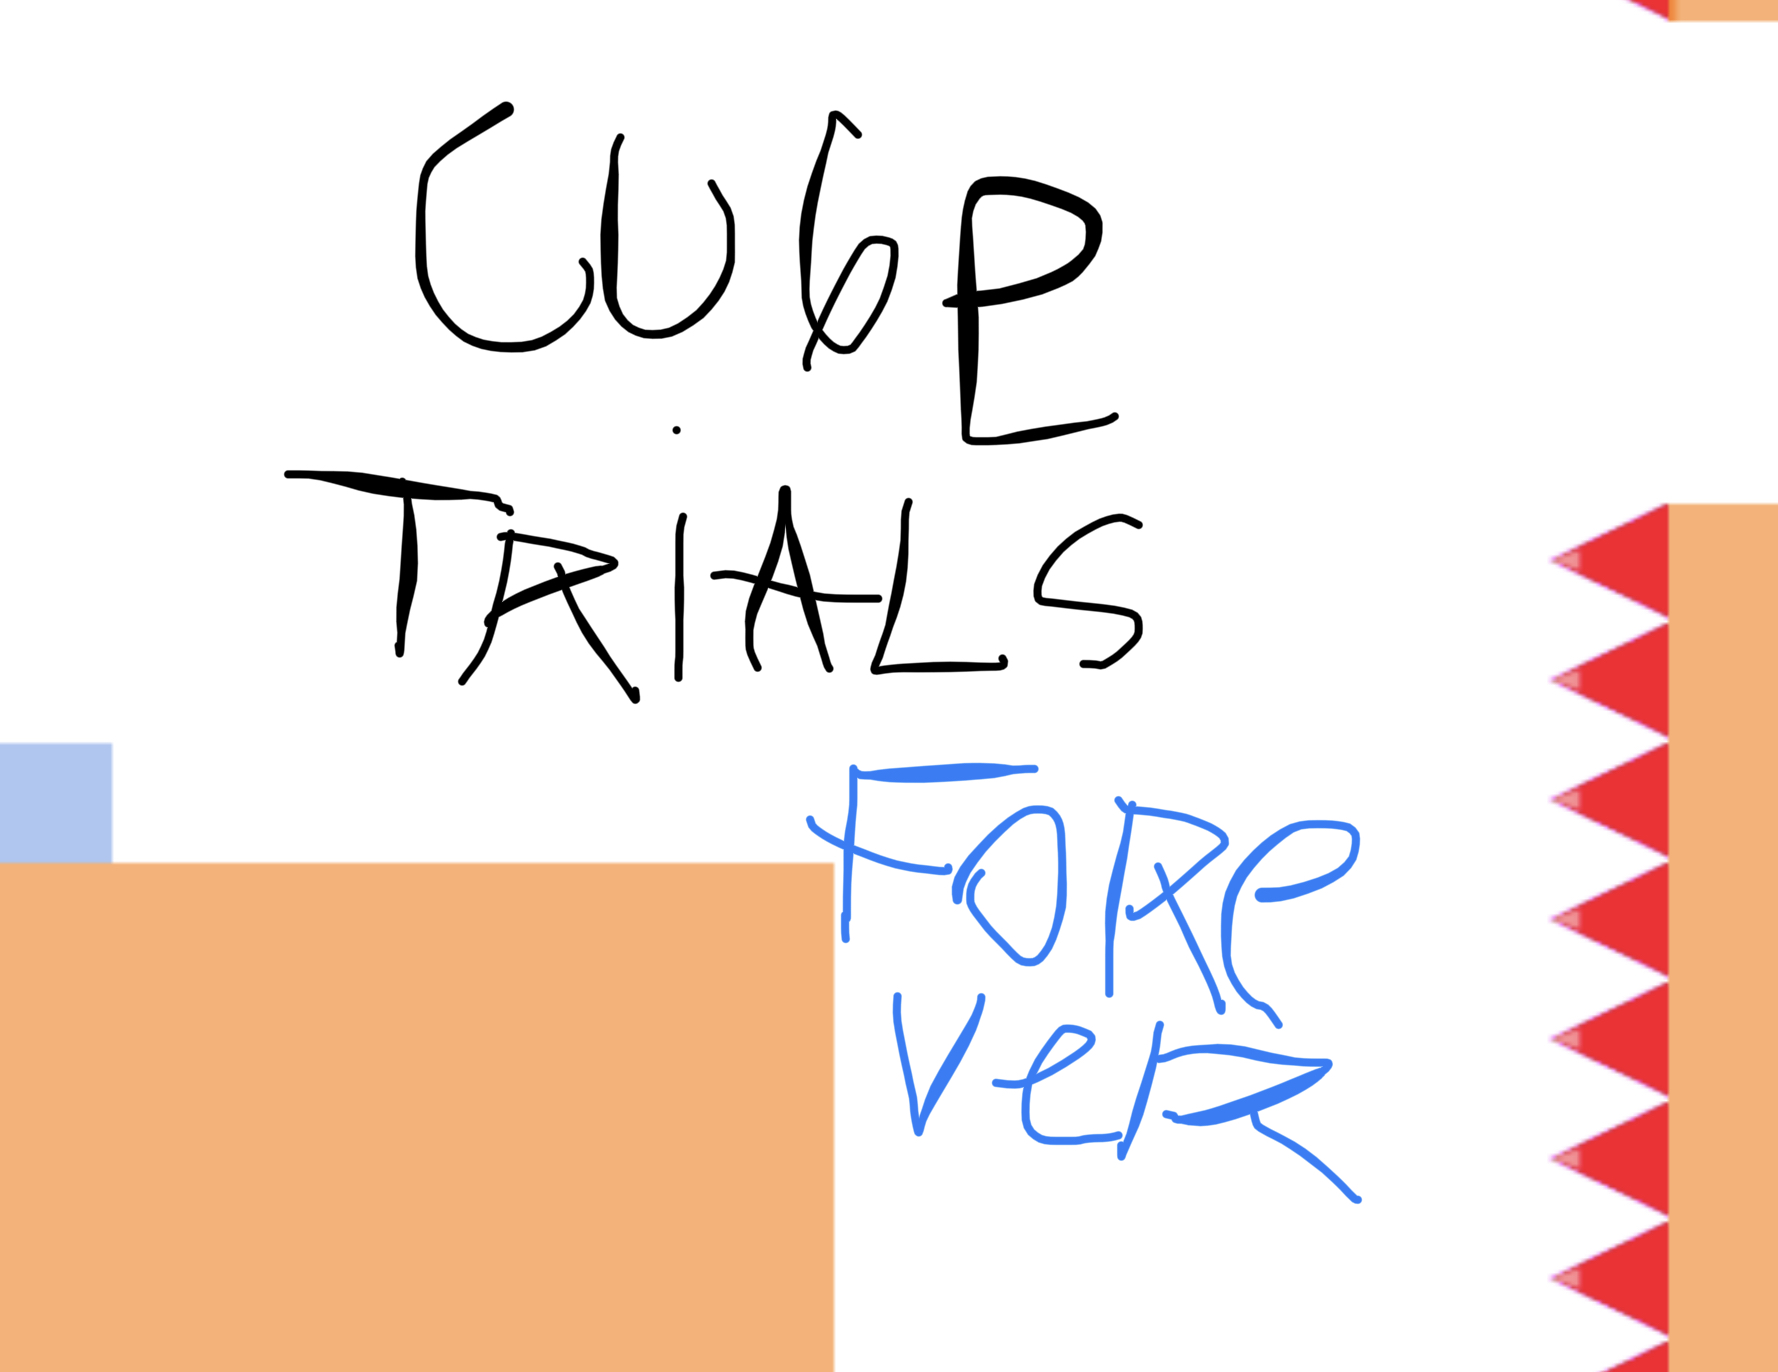 Cube Trials Forever